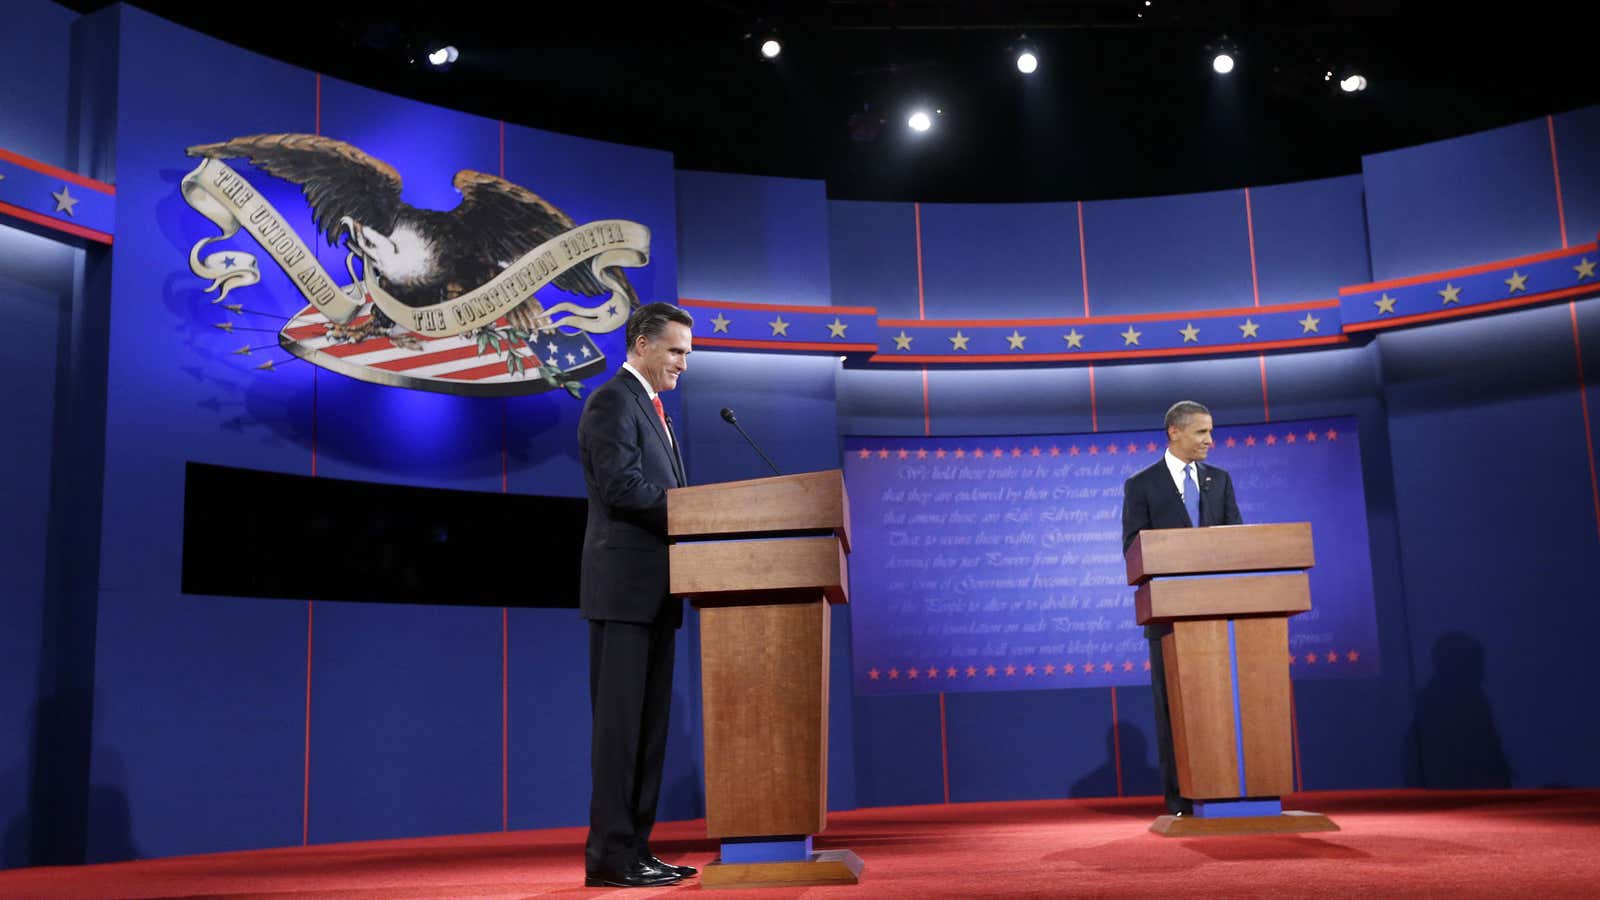 Romney and Obama referred to entrepreneurs and startups more than 30 times in their first debate